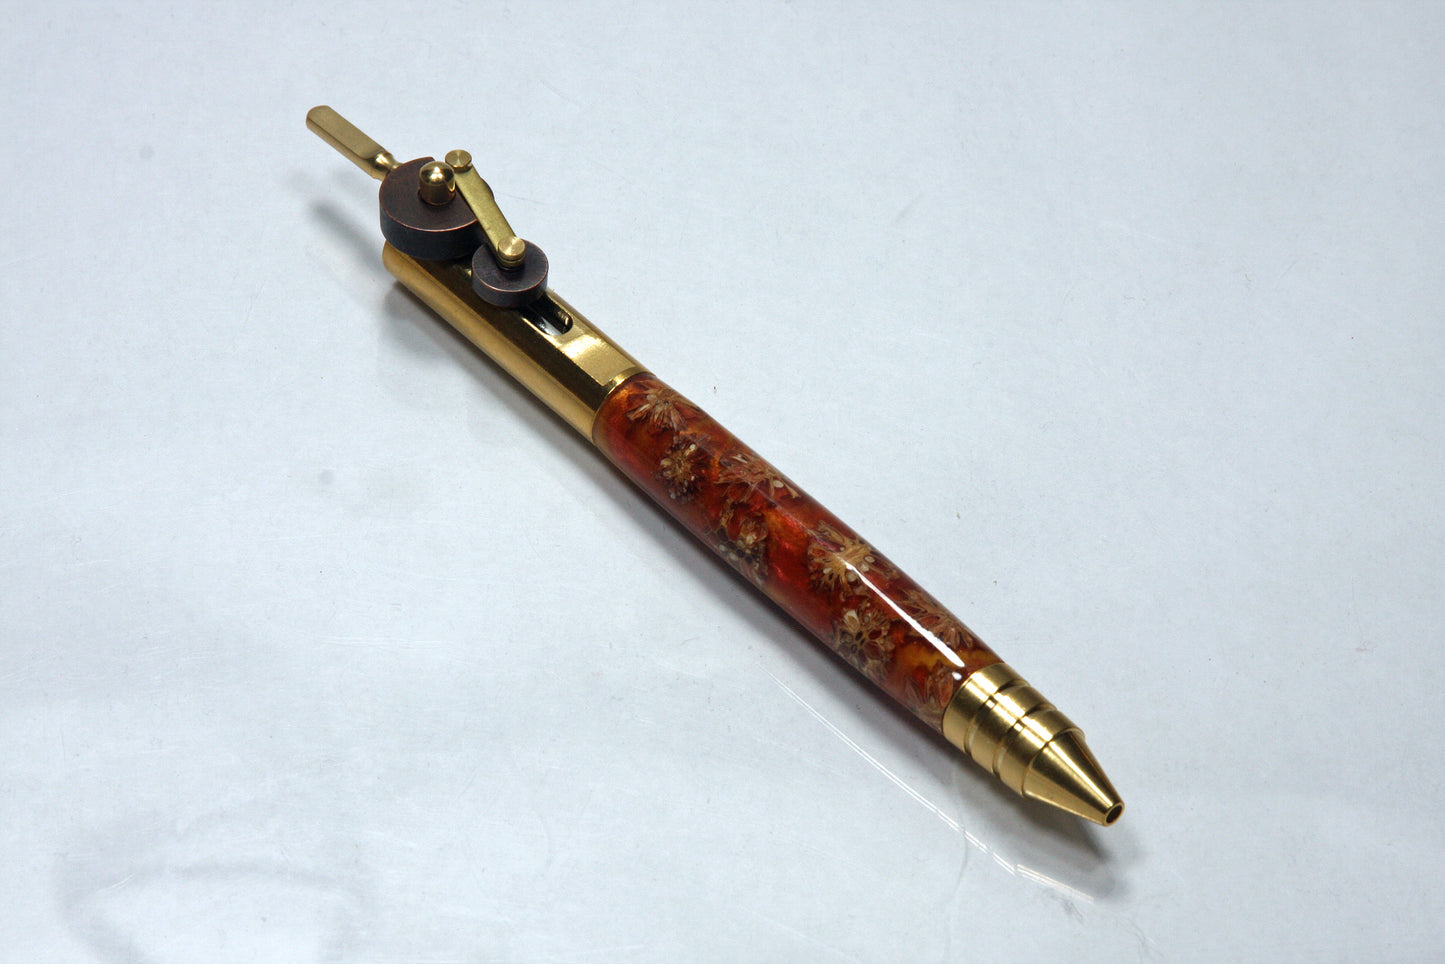 Steampunk Inspired Piston Ballpoint Pen with Dual Finish Gears and Pinecone Resin Body